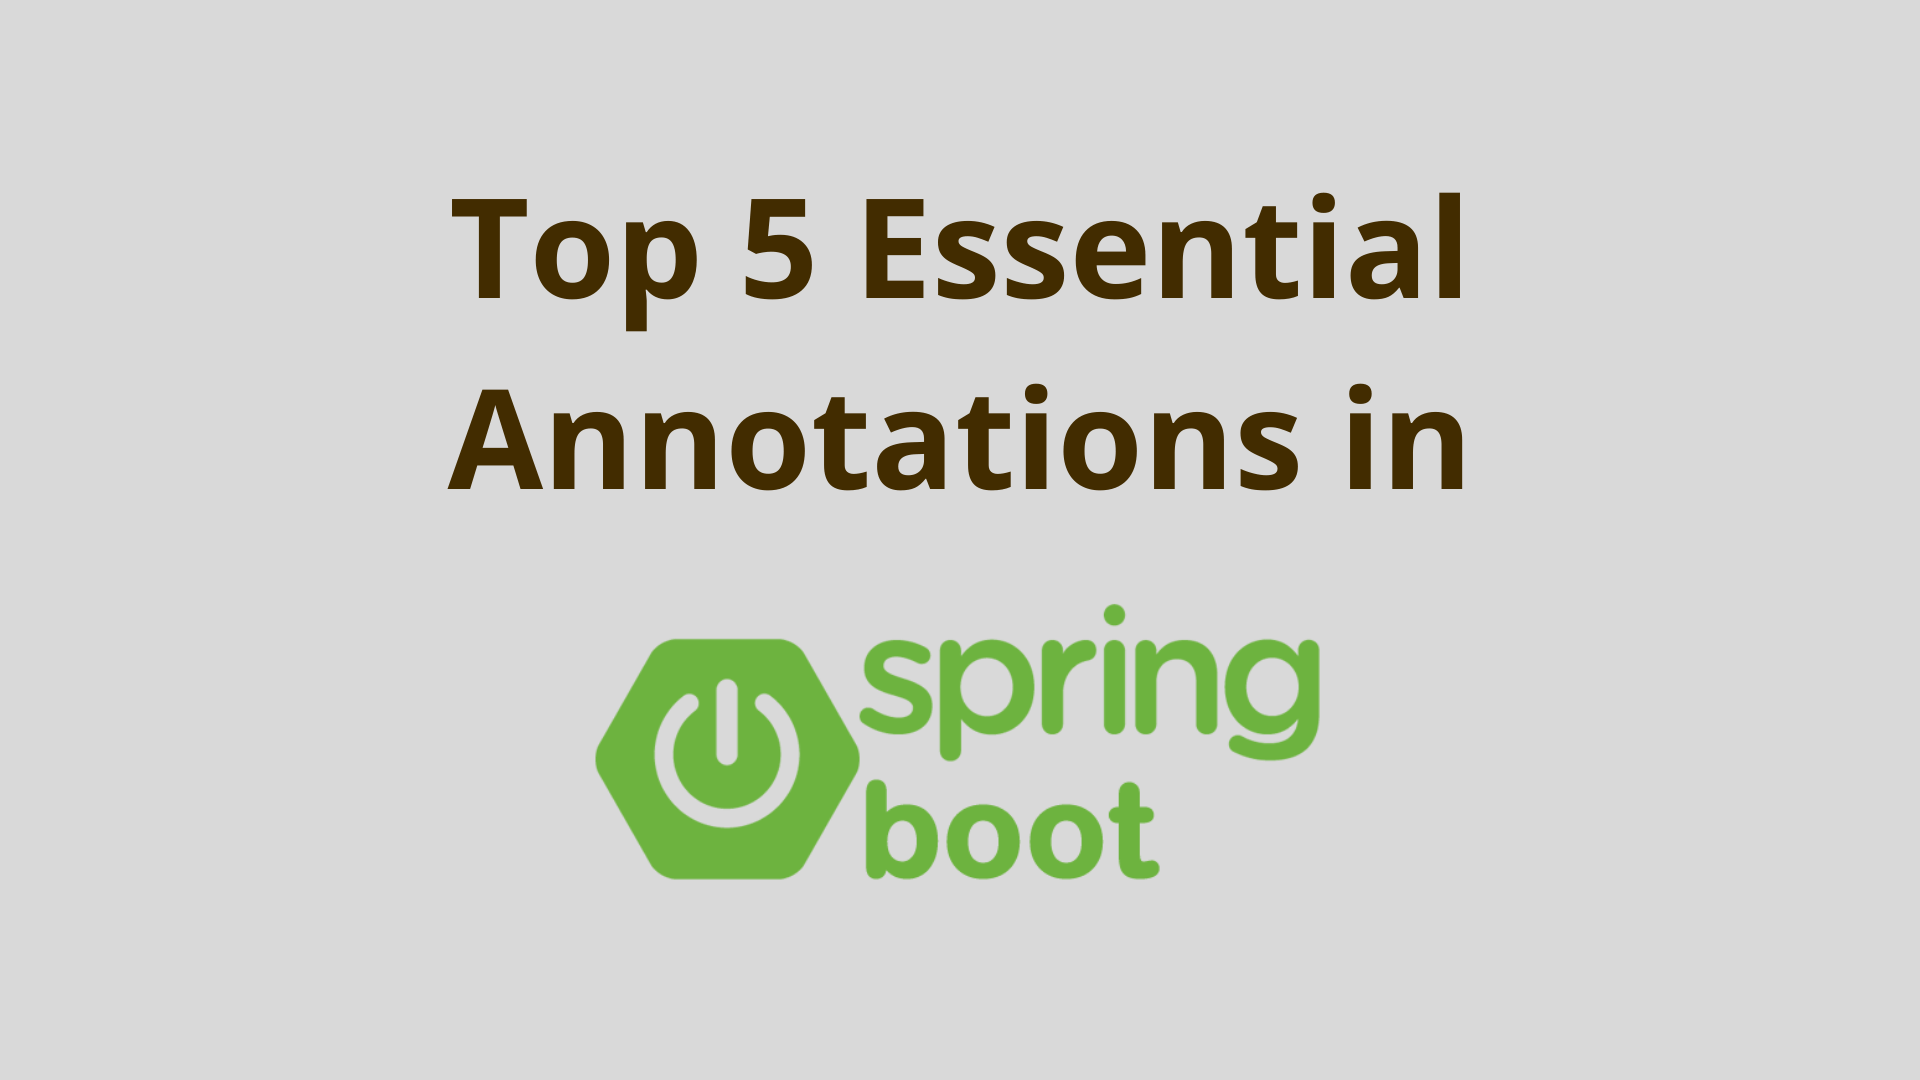 Image of 5 essential Spring Boot annotations